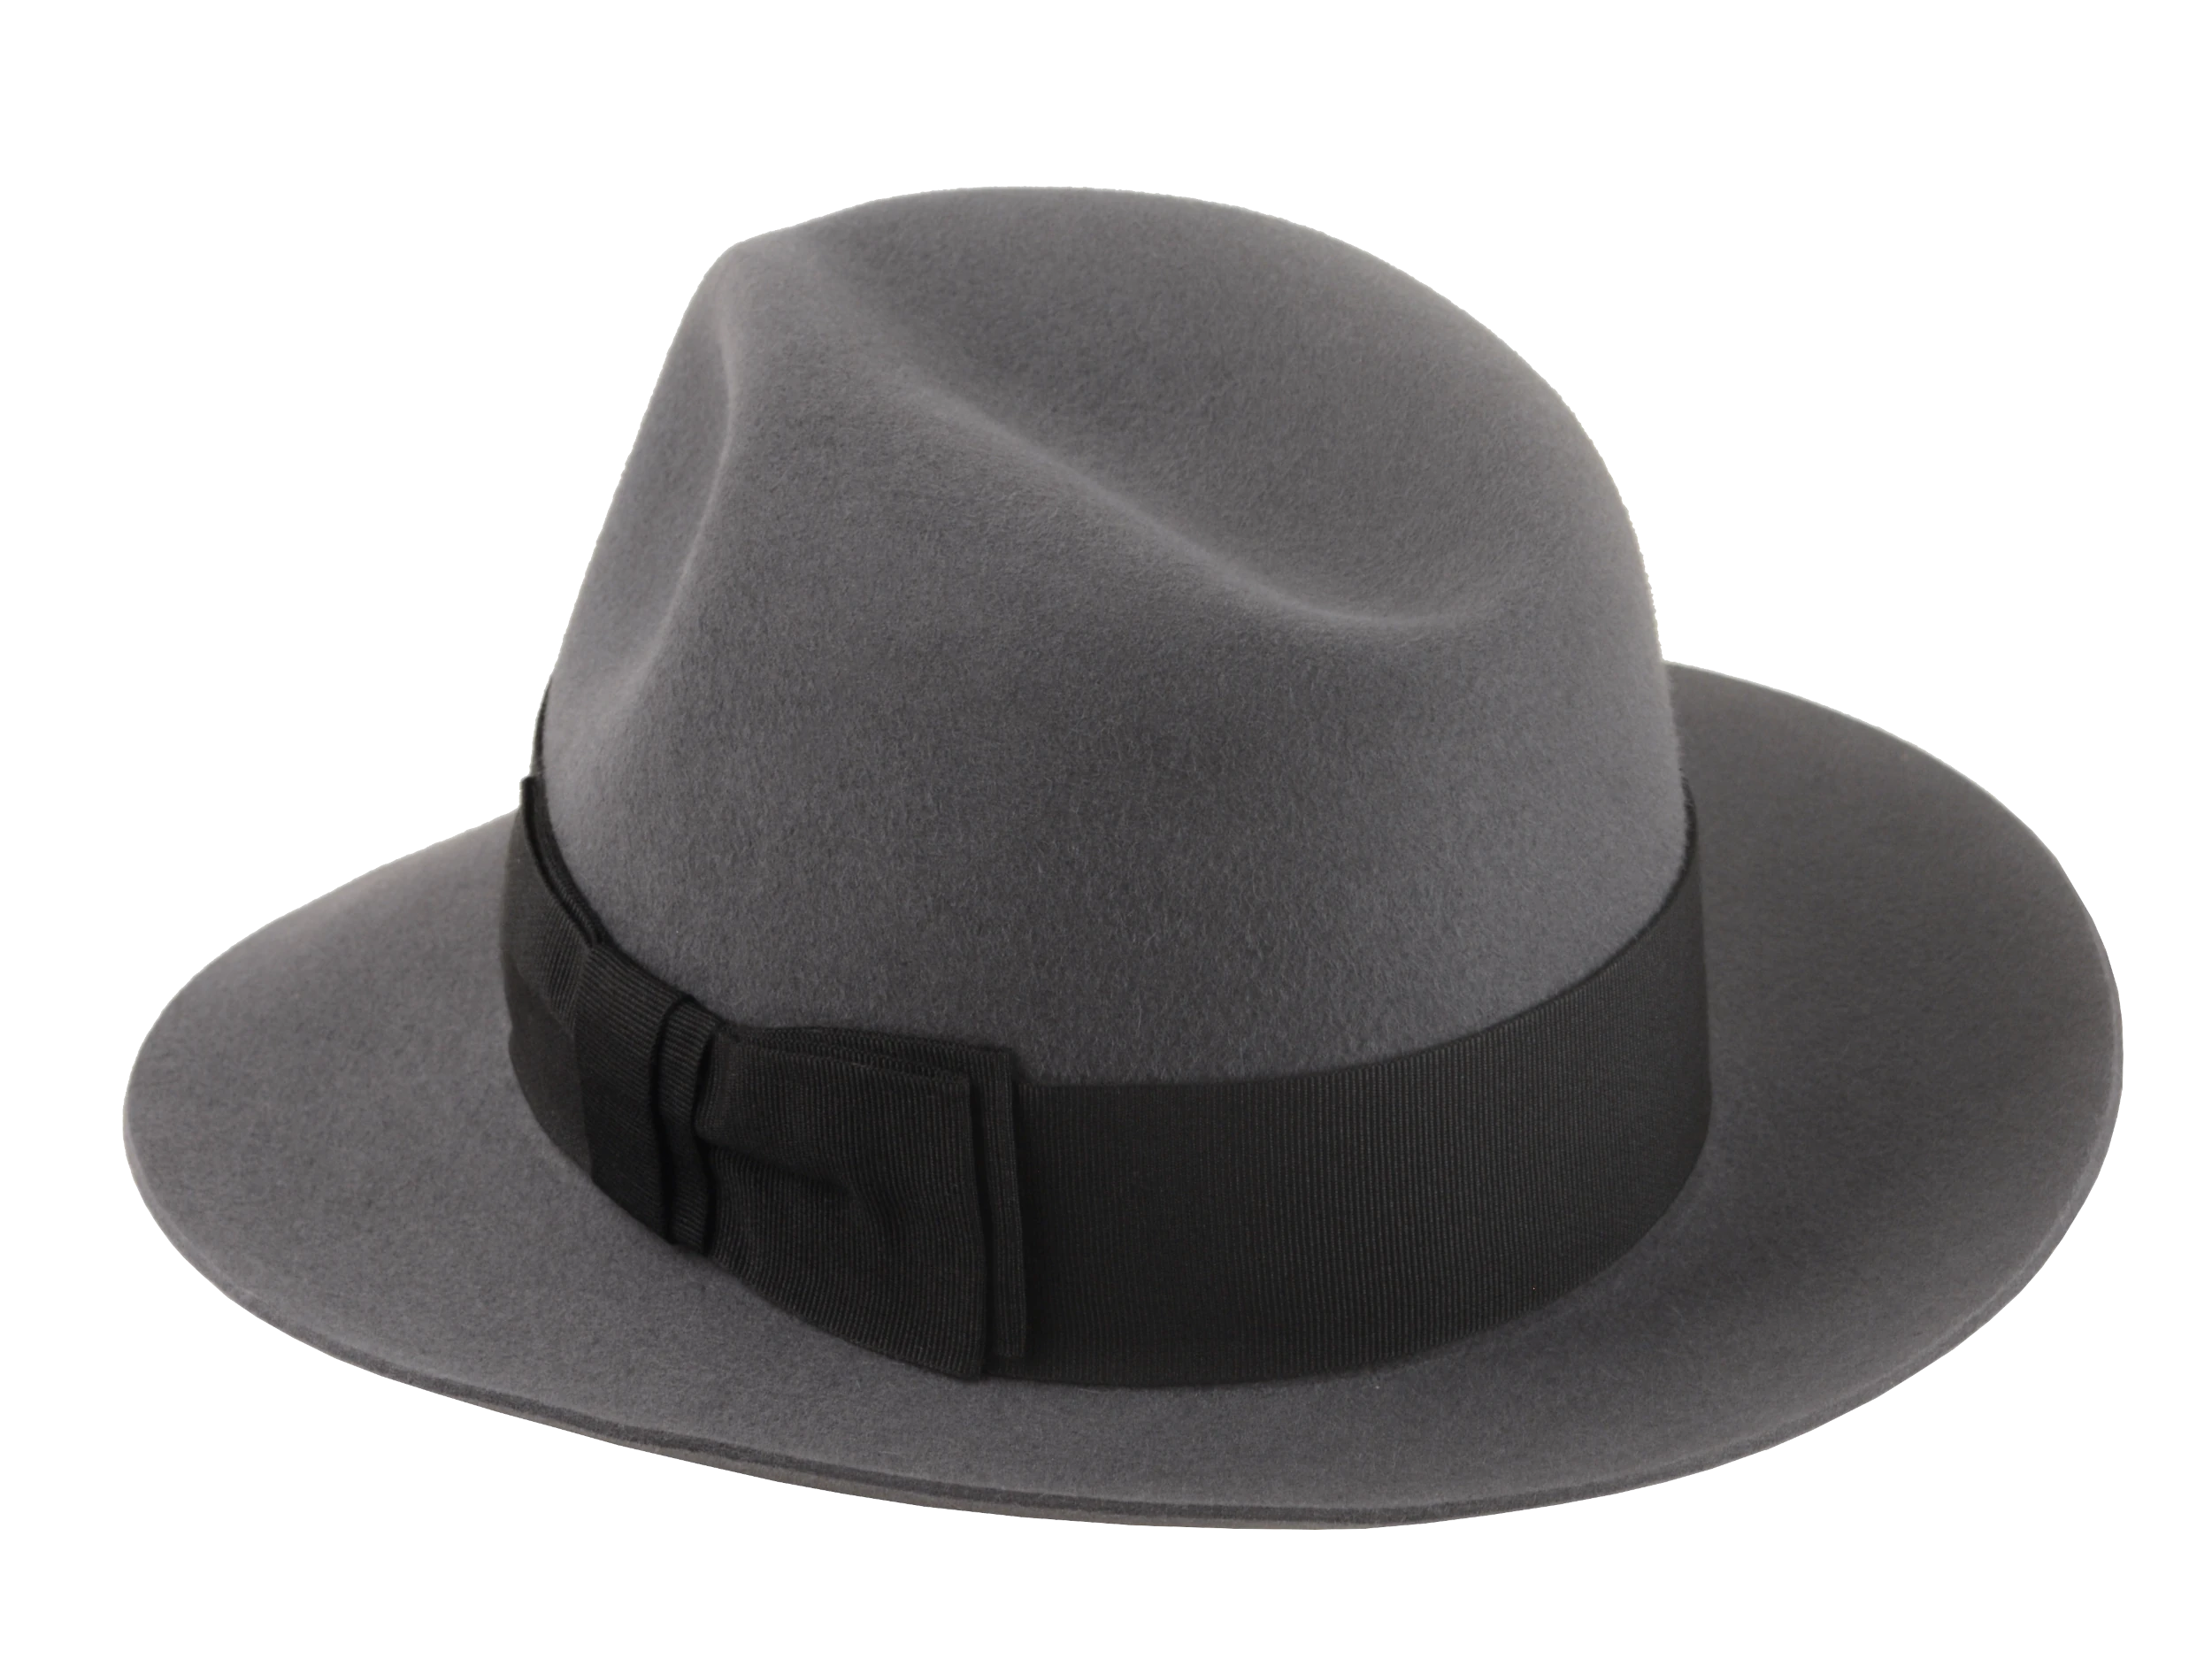 The Silkstone: Tilted angle revealing the hat's intricate craftsmanship | Agnoulita Hats